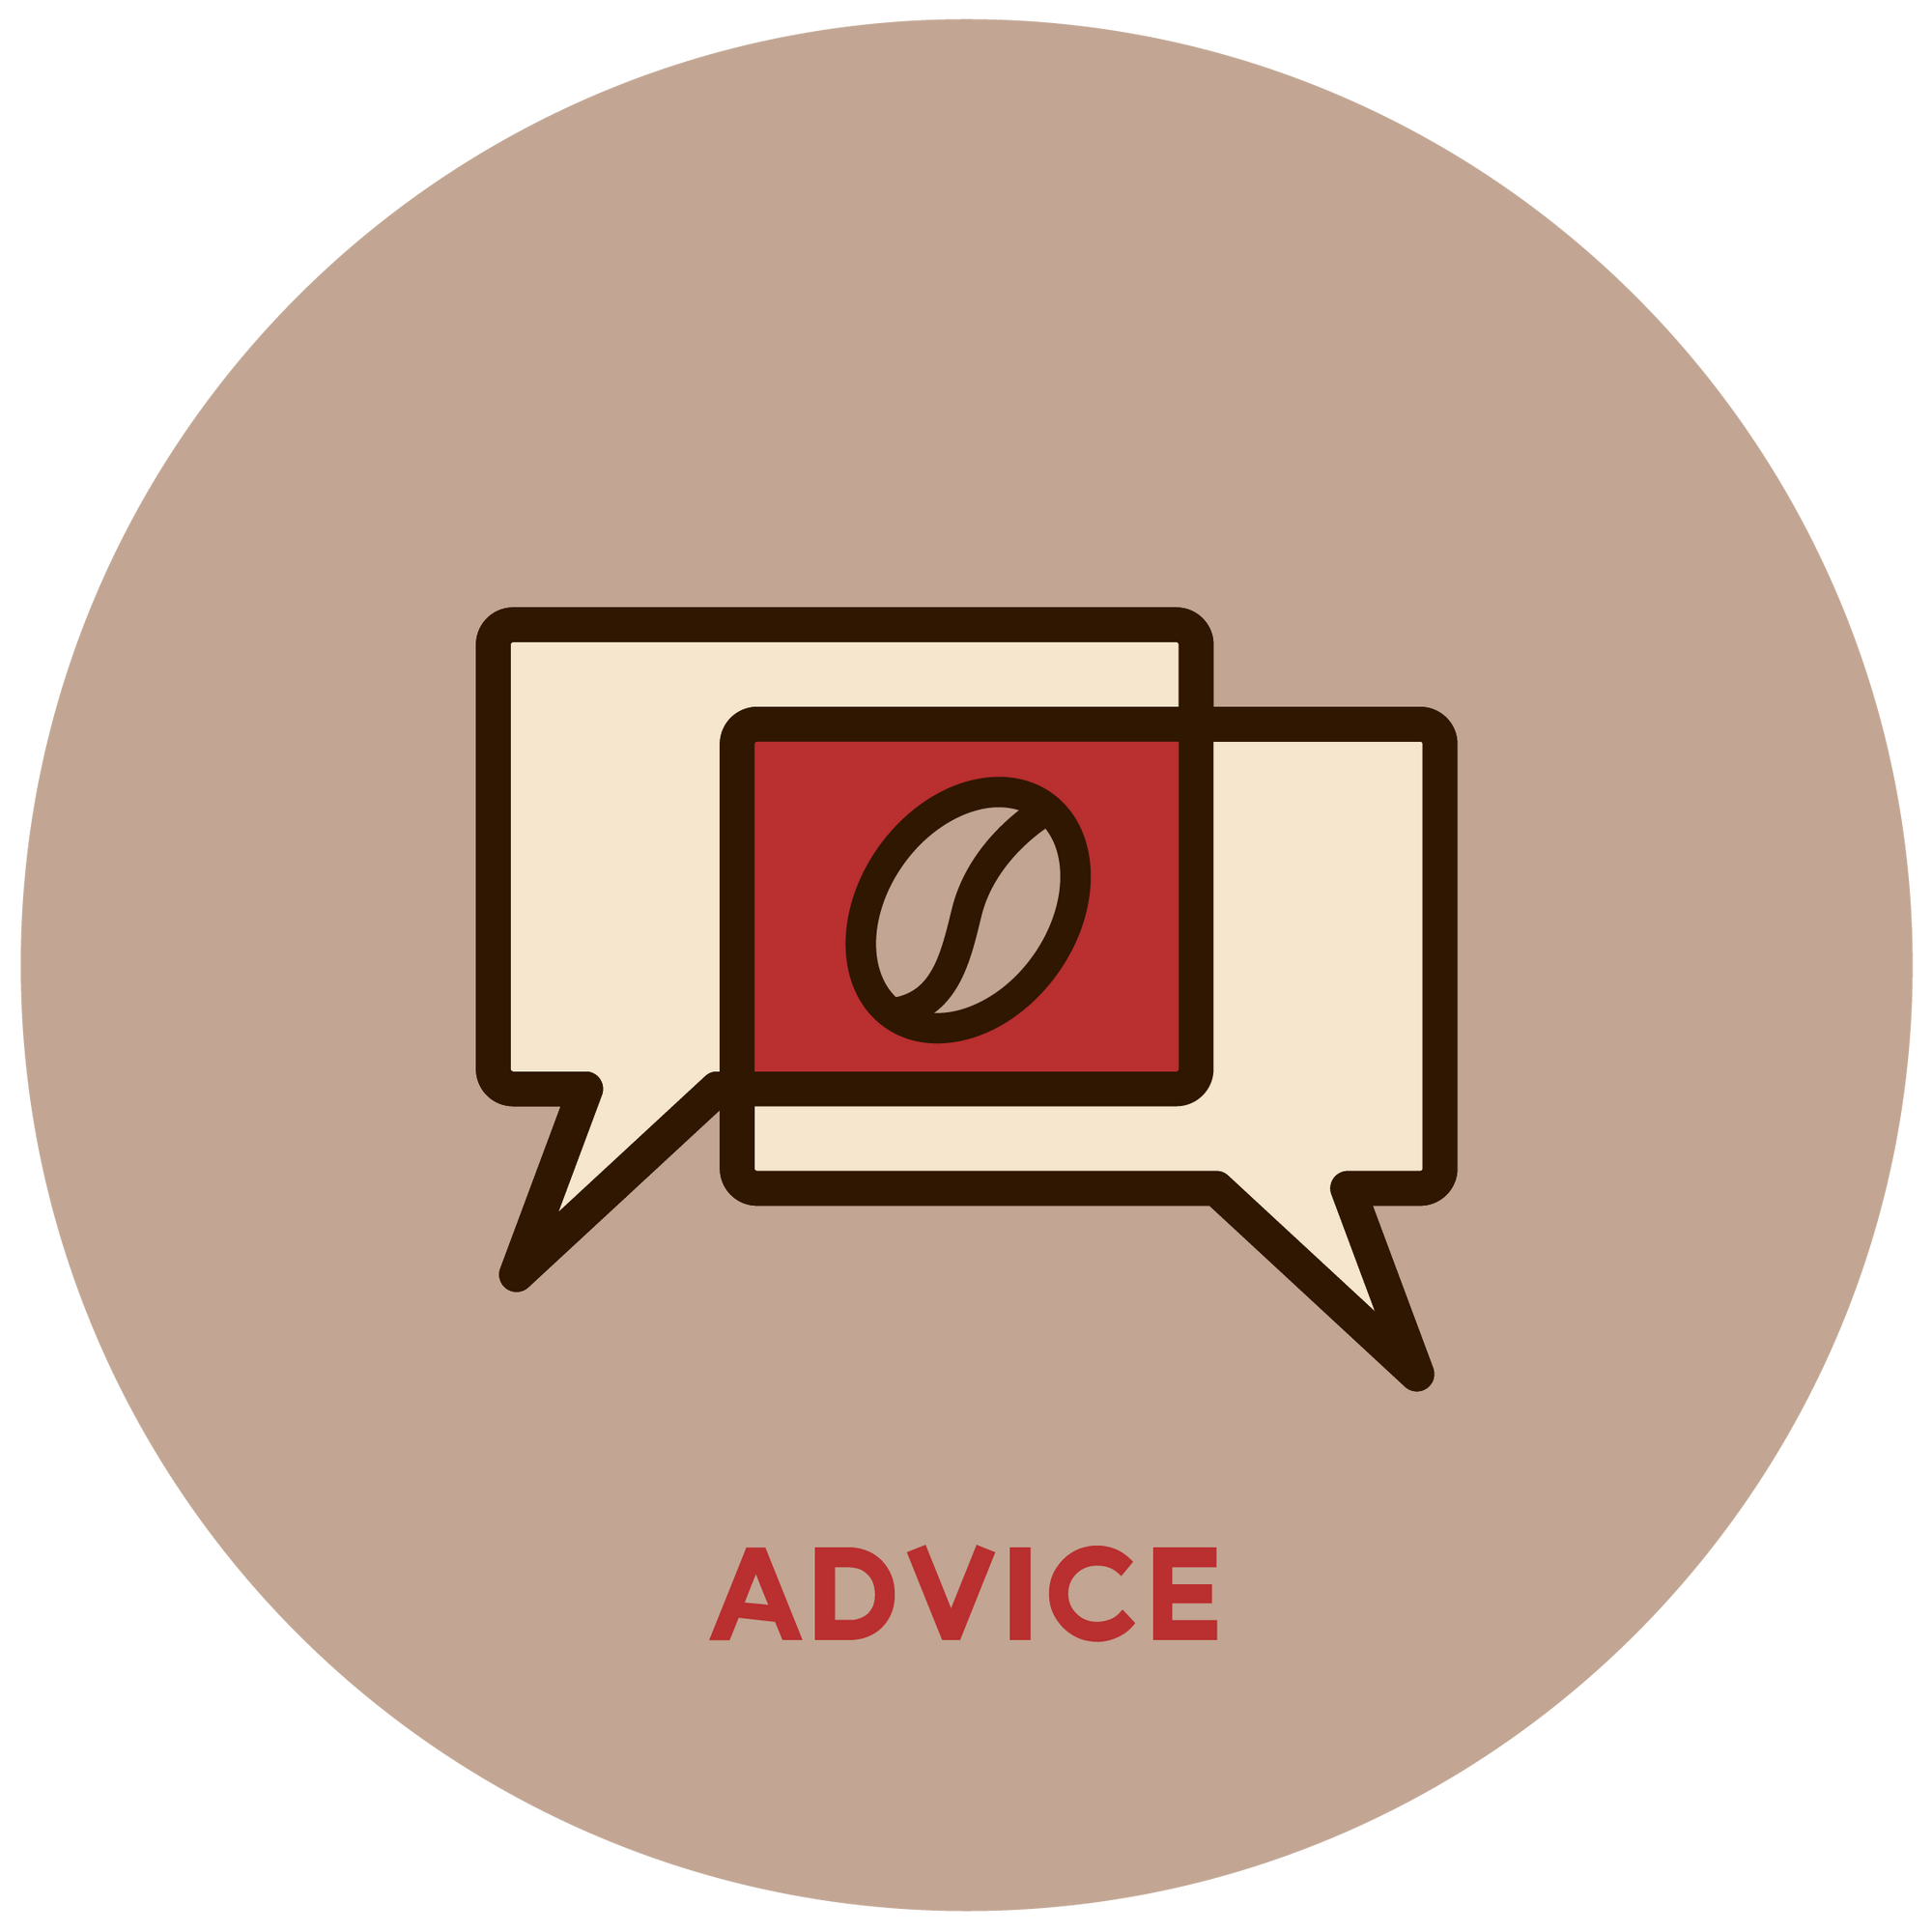 Espresso Canada logo showing they can offer advice when purchasing an espresso machine